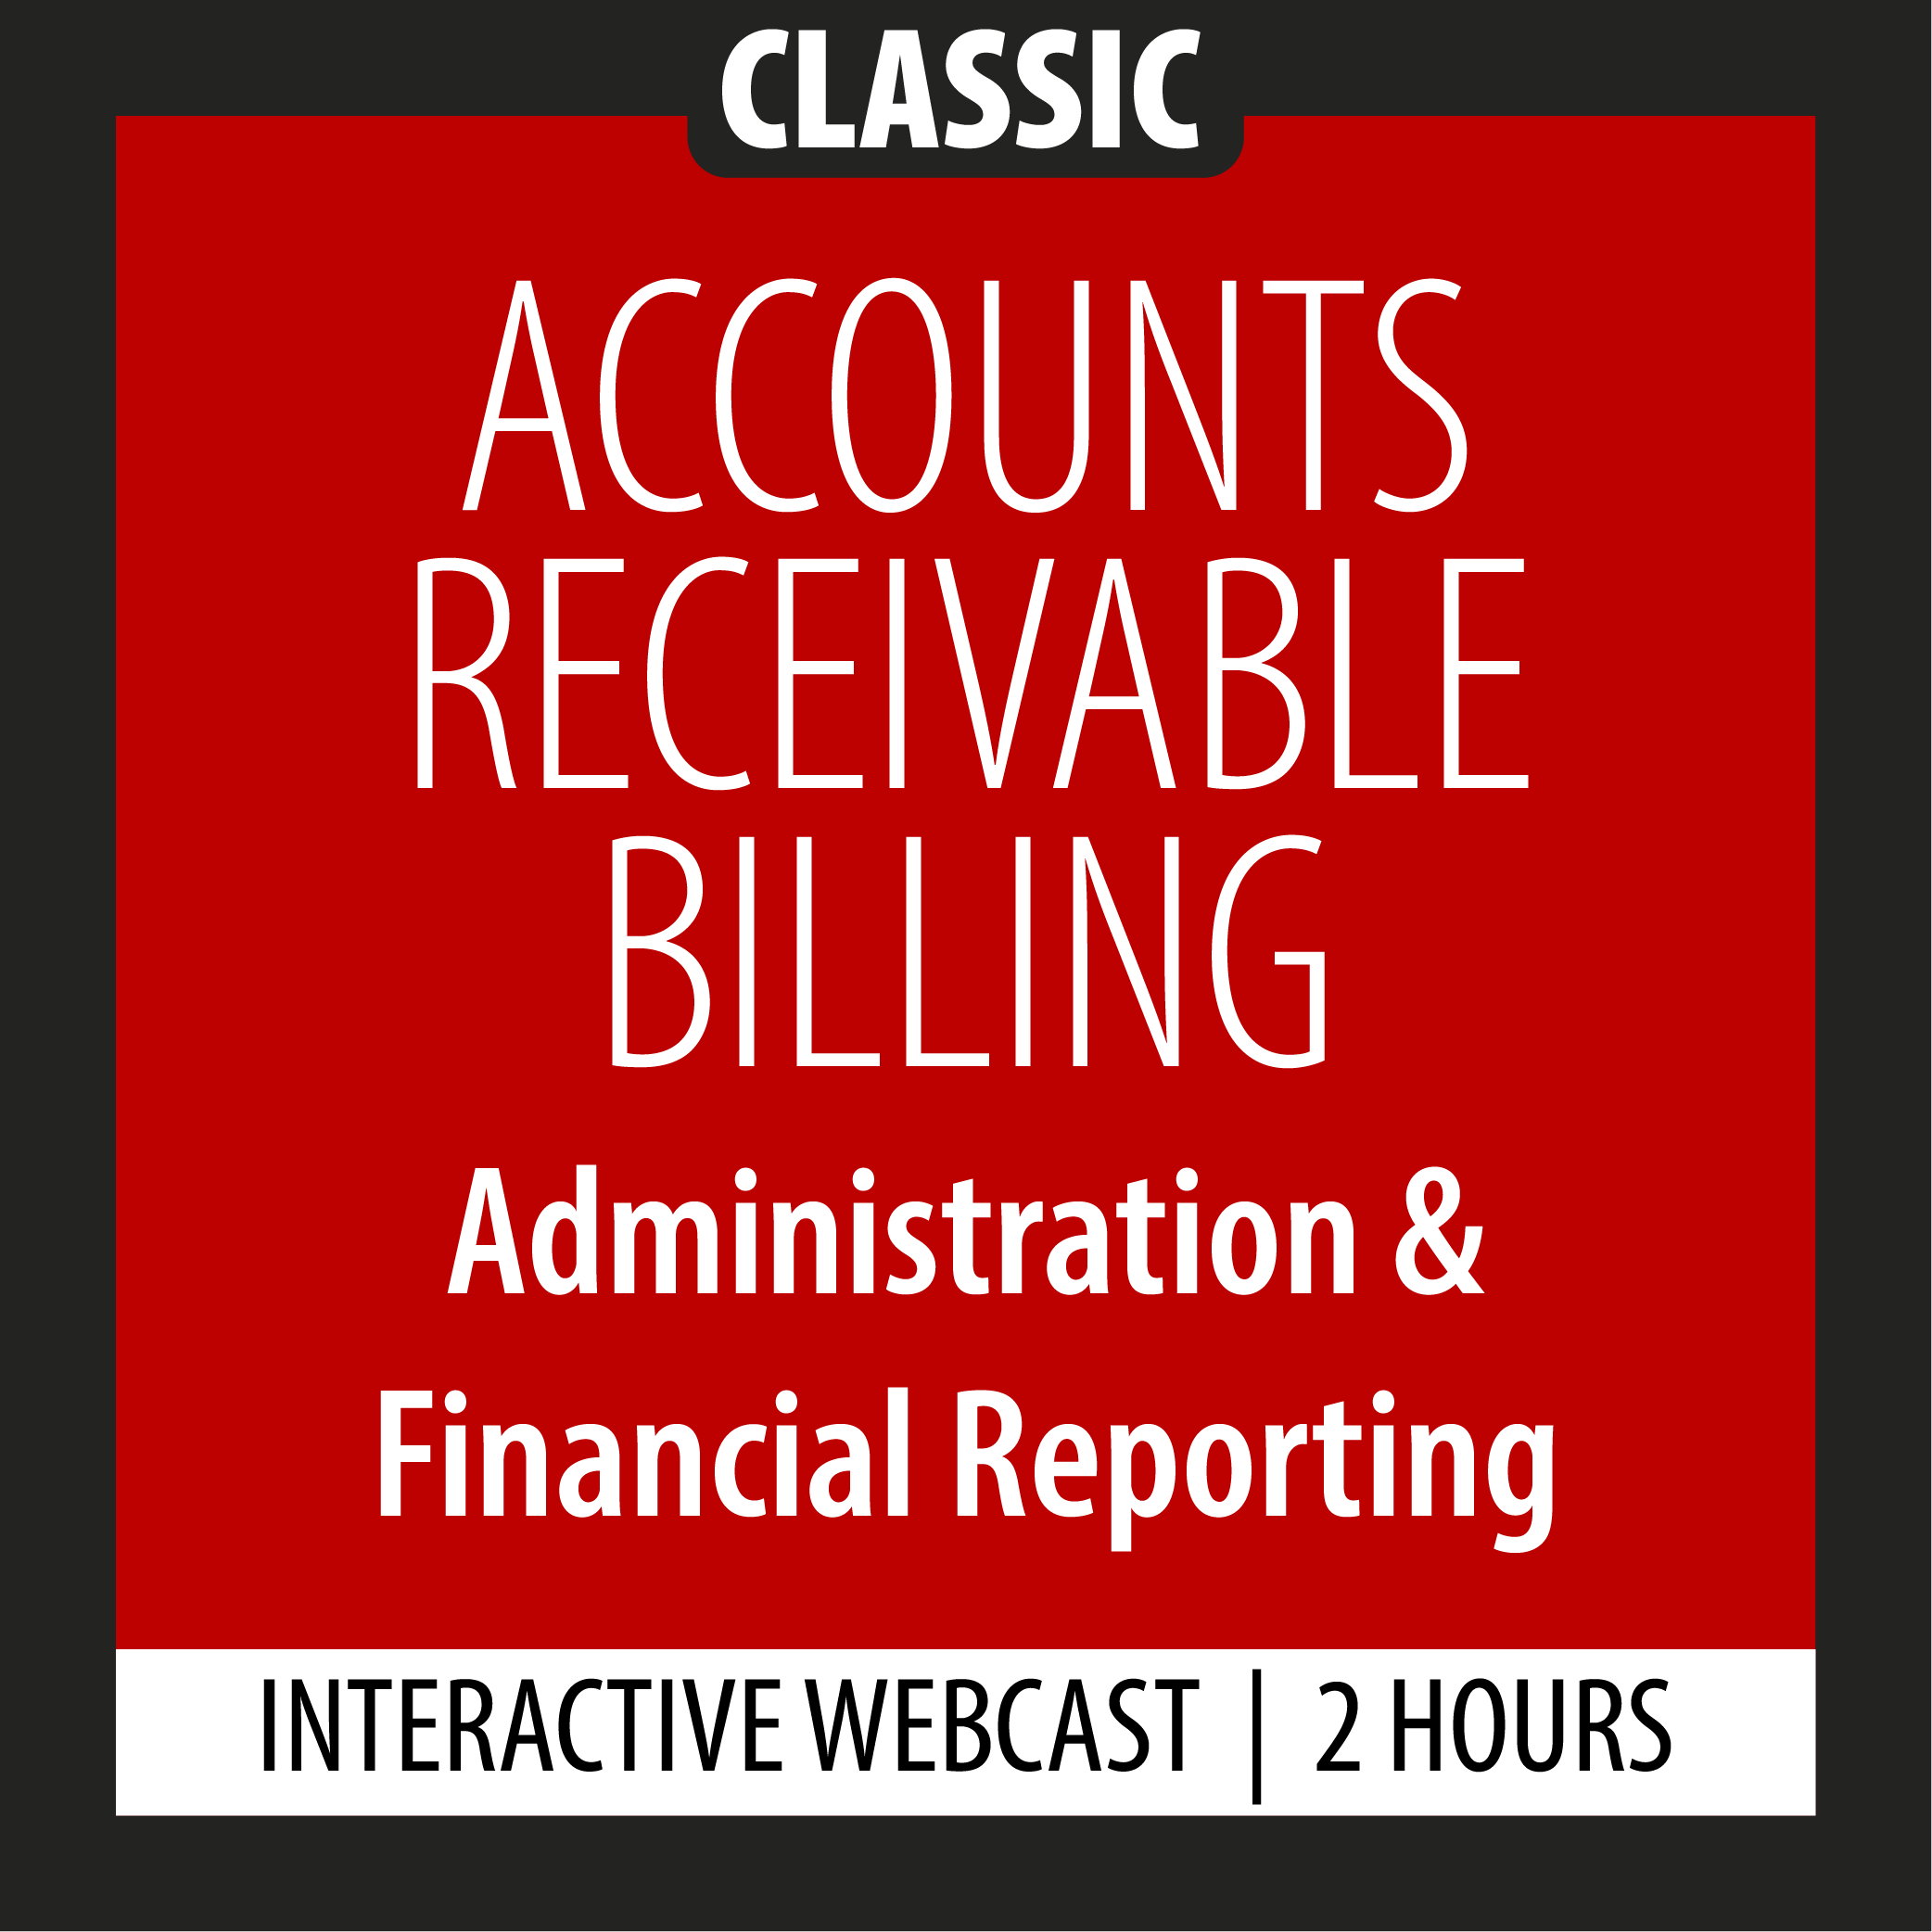 Classic - Accounts Receivable Billing - Administration & Financial Reporting - Webcast - 2 Hours